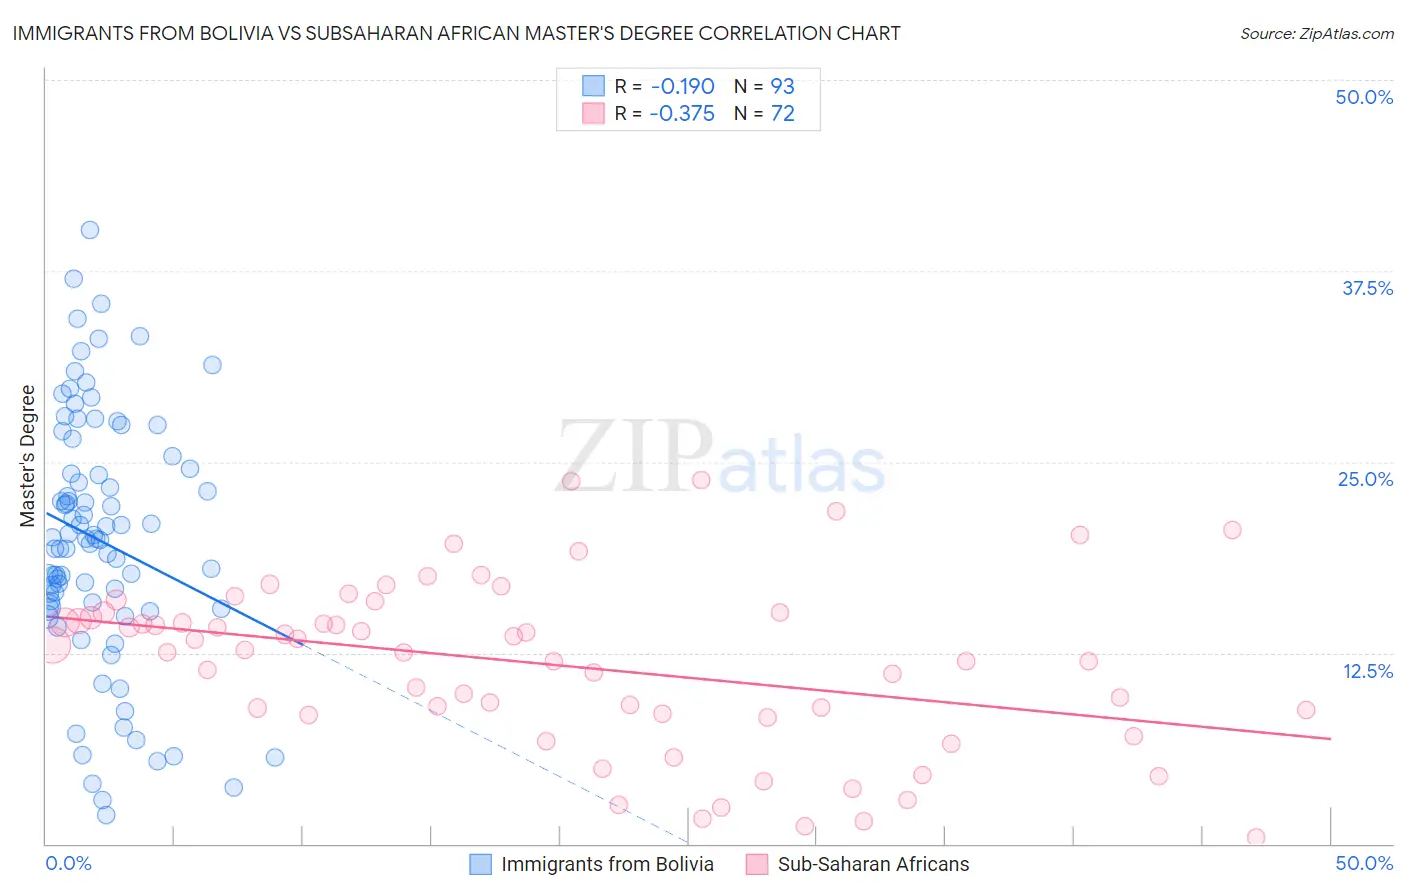 Immigrants from Bolivia vs Subsaharan African Master's Degree